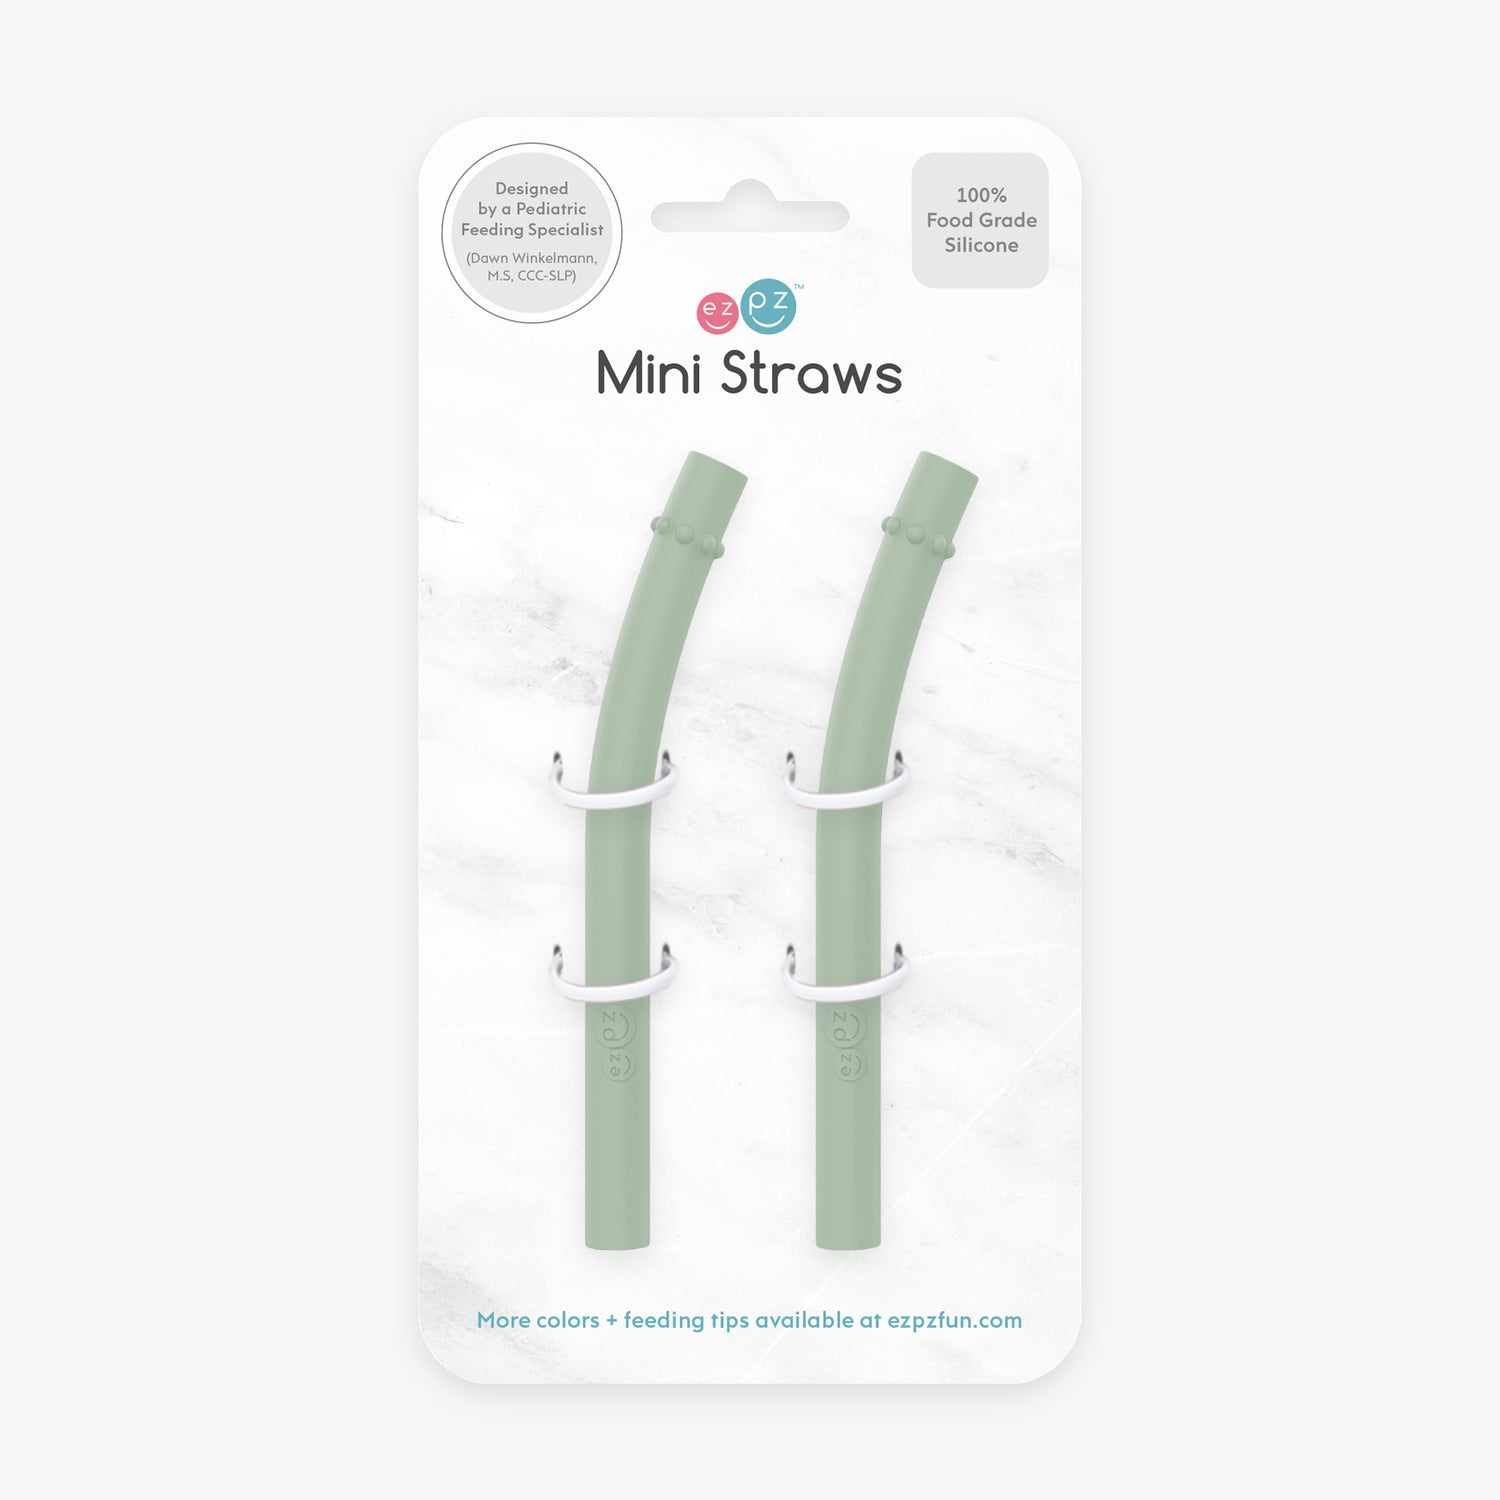 Mini Straws in Sage / Silicone Straw Replacement Pack for the ezpz Mini Cup & Straw System